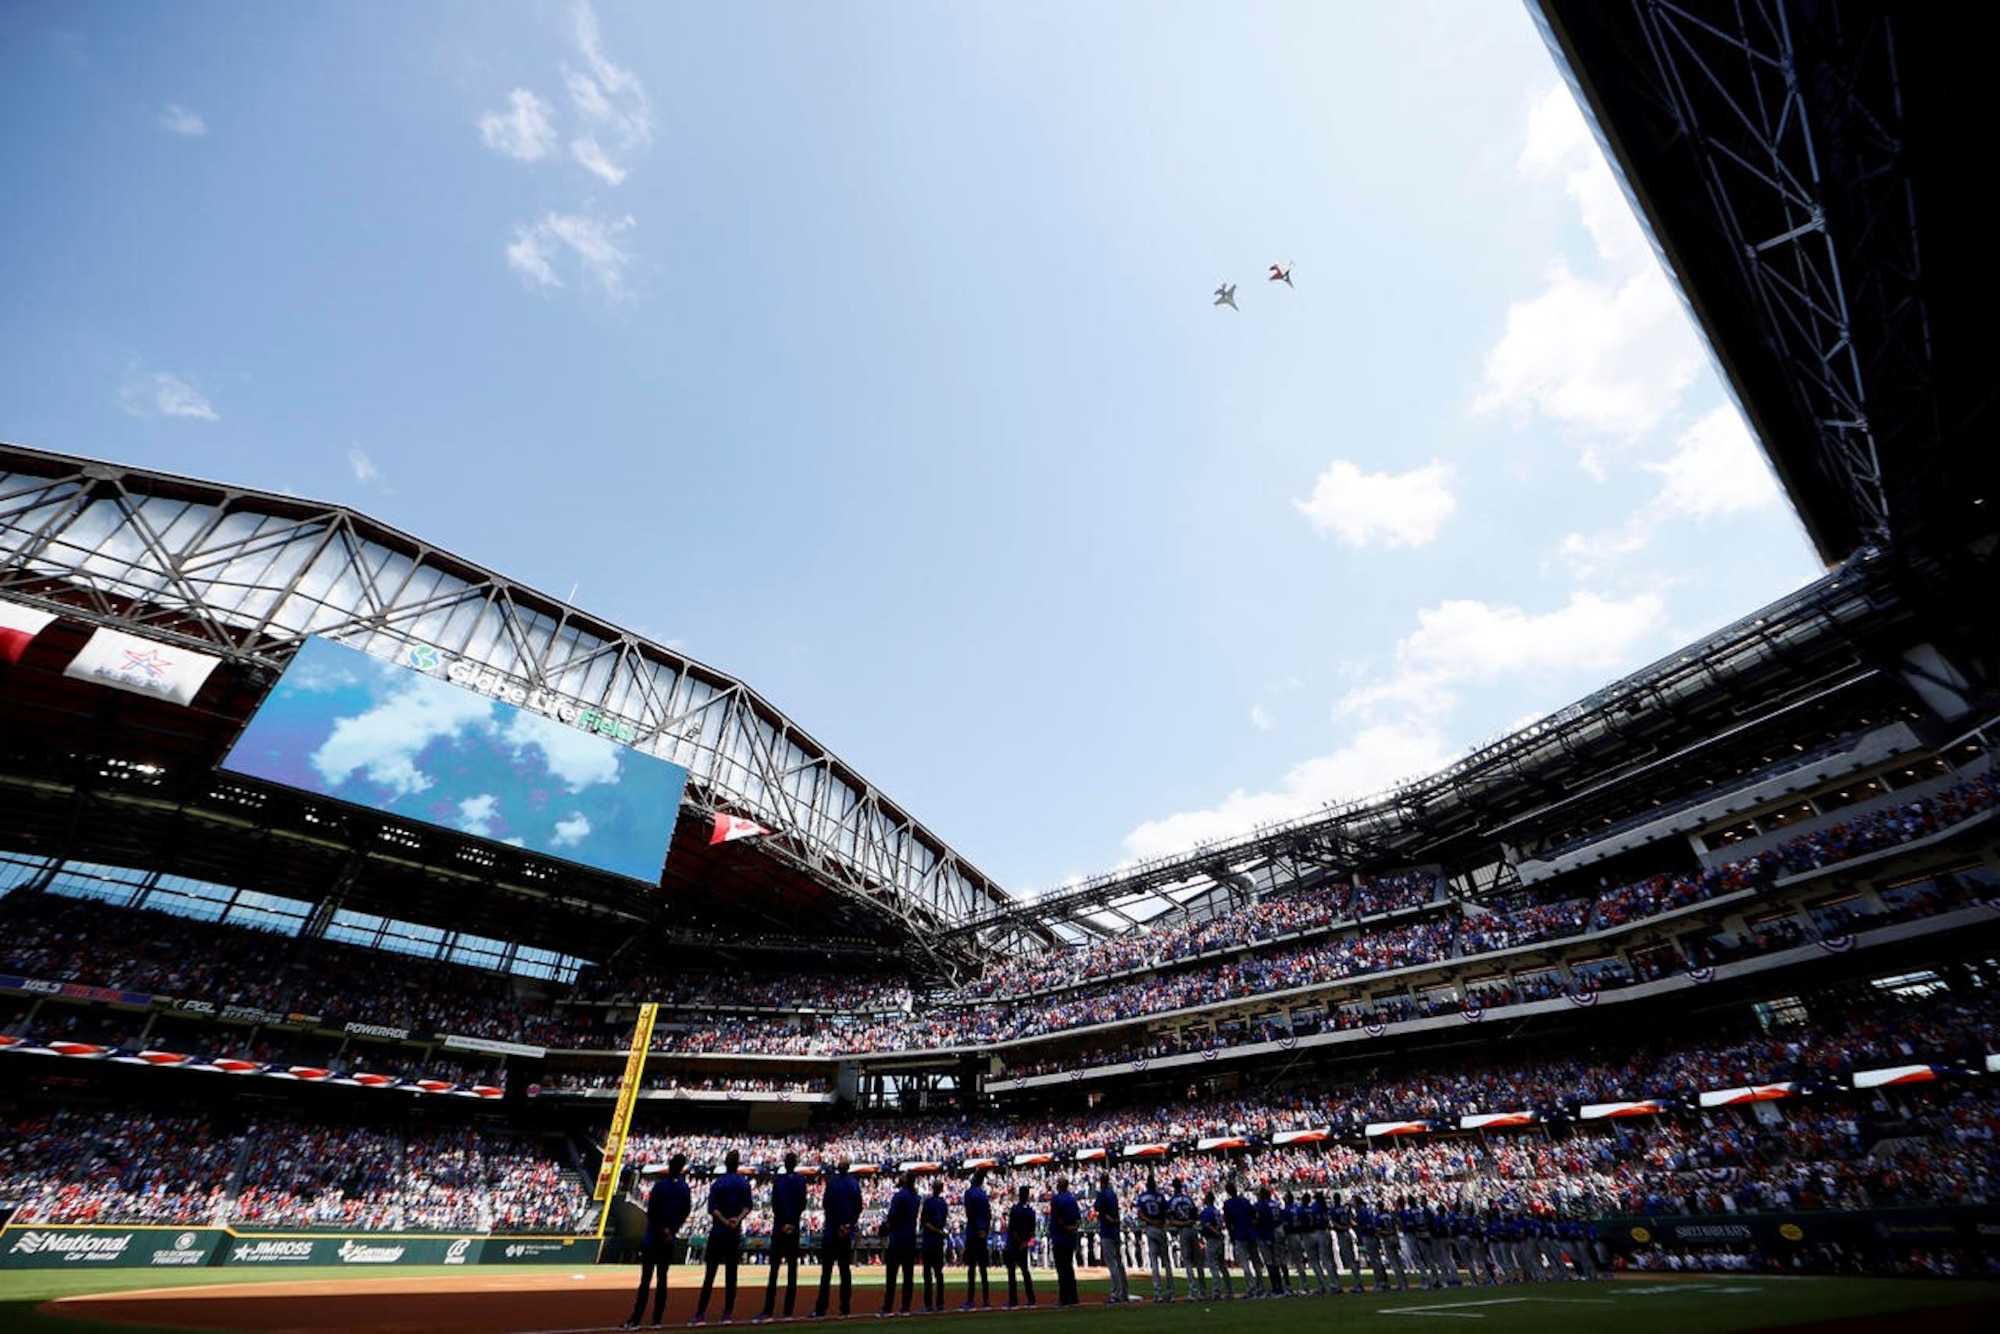 F-16C Fighting Falcon pilots assigned to the 457th Fighter Squadron, 301st Fighter Wing, U.S. Naval Air Station Joint Reserve Base Fort Worth, Texas performed a flyover during the opening ceremony for Major League Baseball’s Texas Rangers team on Opening Day at Globe Life Field, April 5, 2021. The stadium opened for the first time to the public for a Texas Rangers game since its construction in 2020.